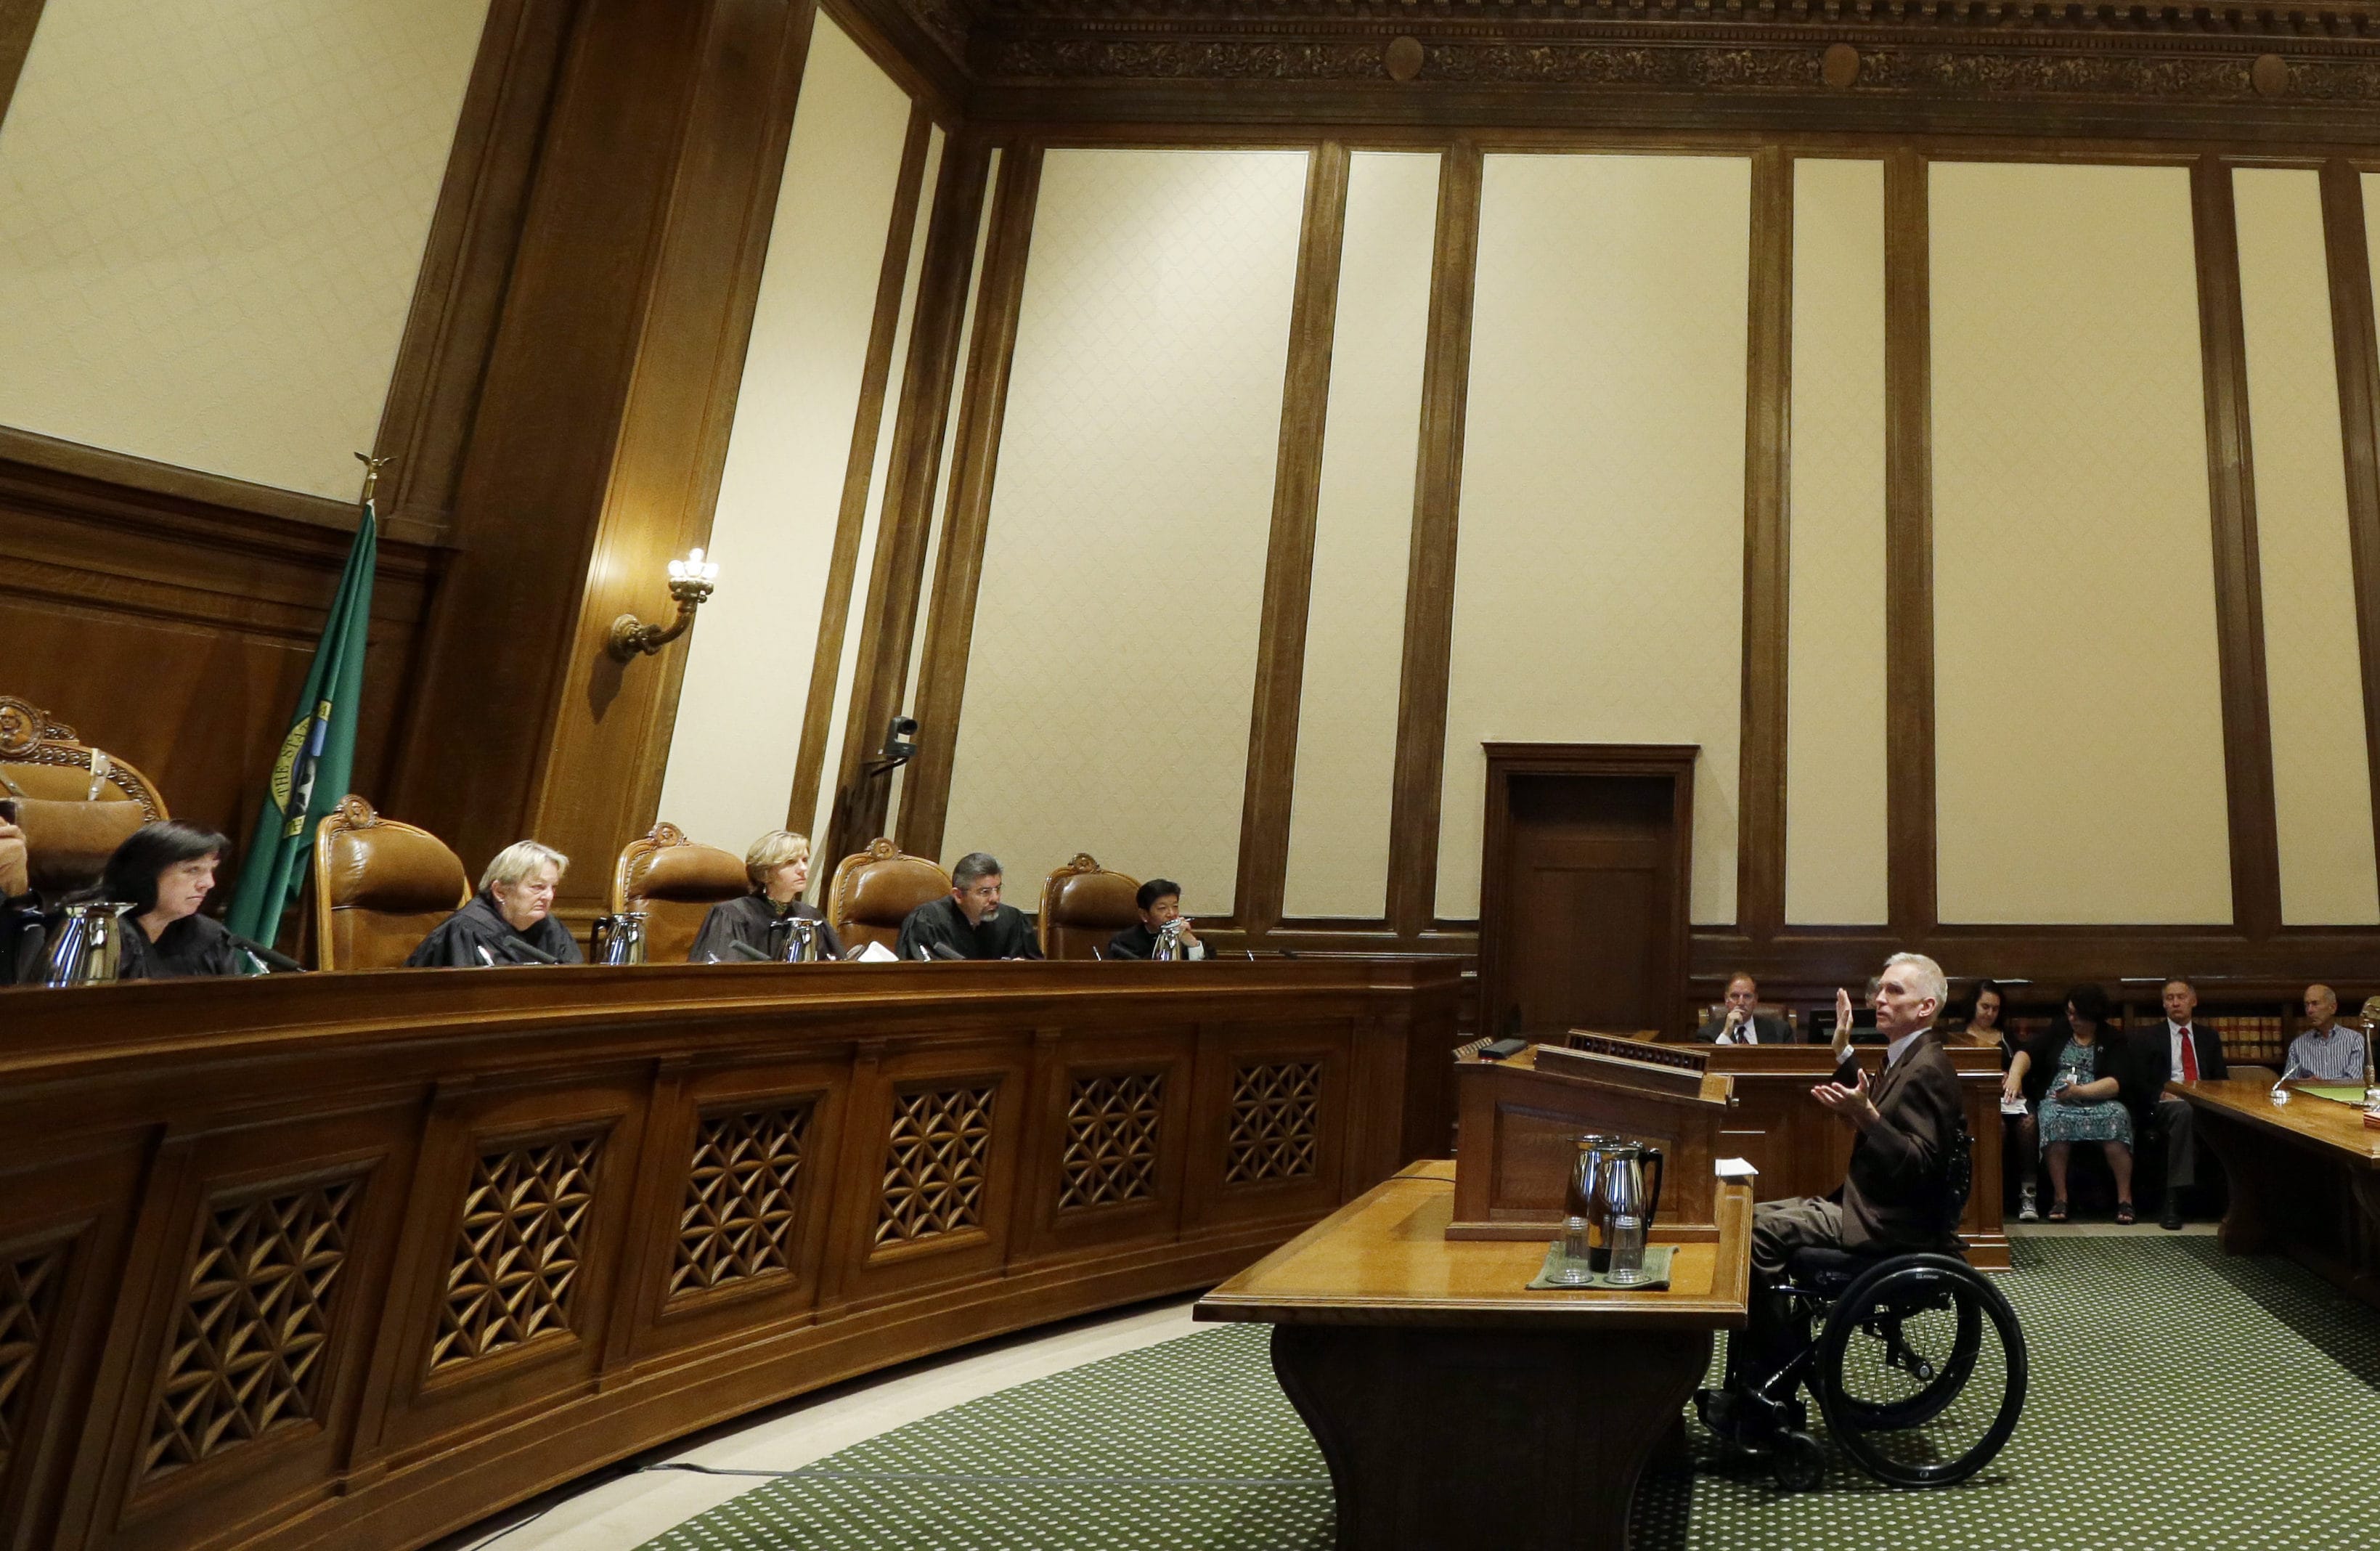 Tom Ahearne, center, the lead attorney in a lawsuit against the state of Washington over education funding, speaks during a hearing before the Washington State Supreme Court, Wednesday, Sept. 7, 2016, in Olympia, Wash. The state wants the court to remove a contempt order and $100,000-a-day sanctions that have been accumulating for more than a year and which are supposed to be set aside into an education account.  (AP Photo/Ted S.